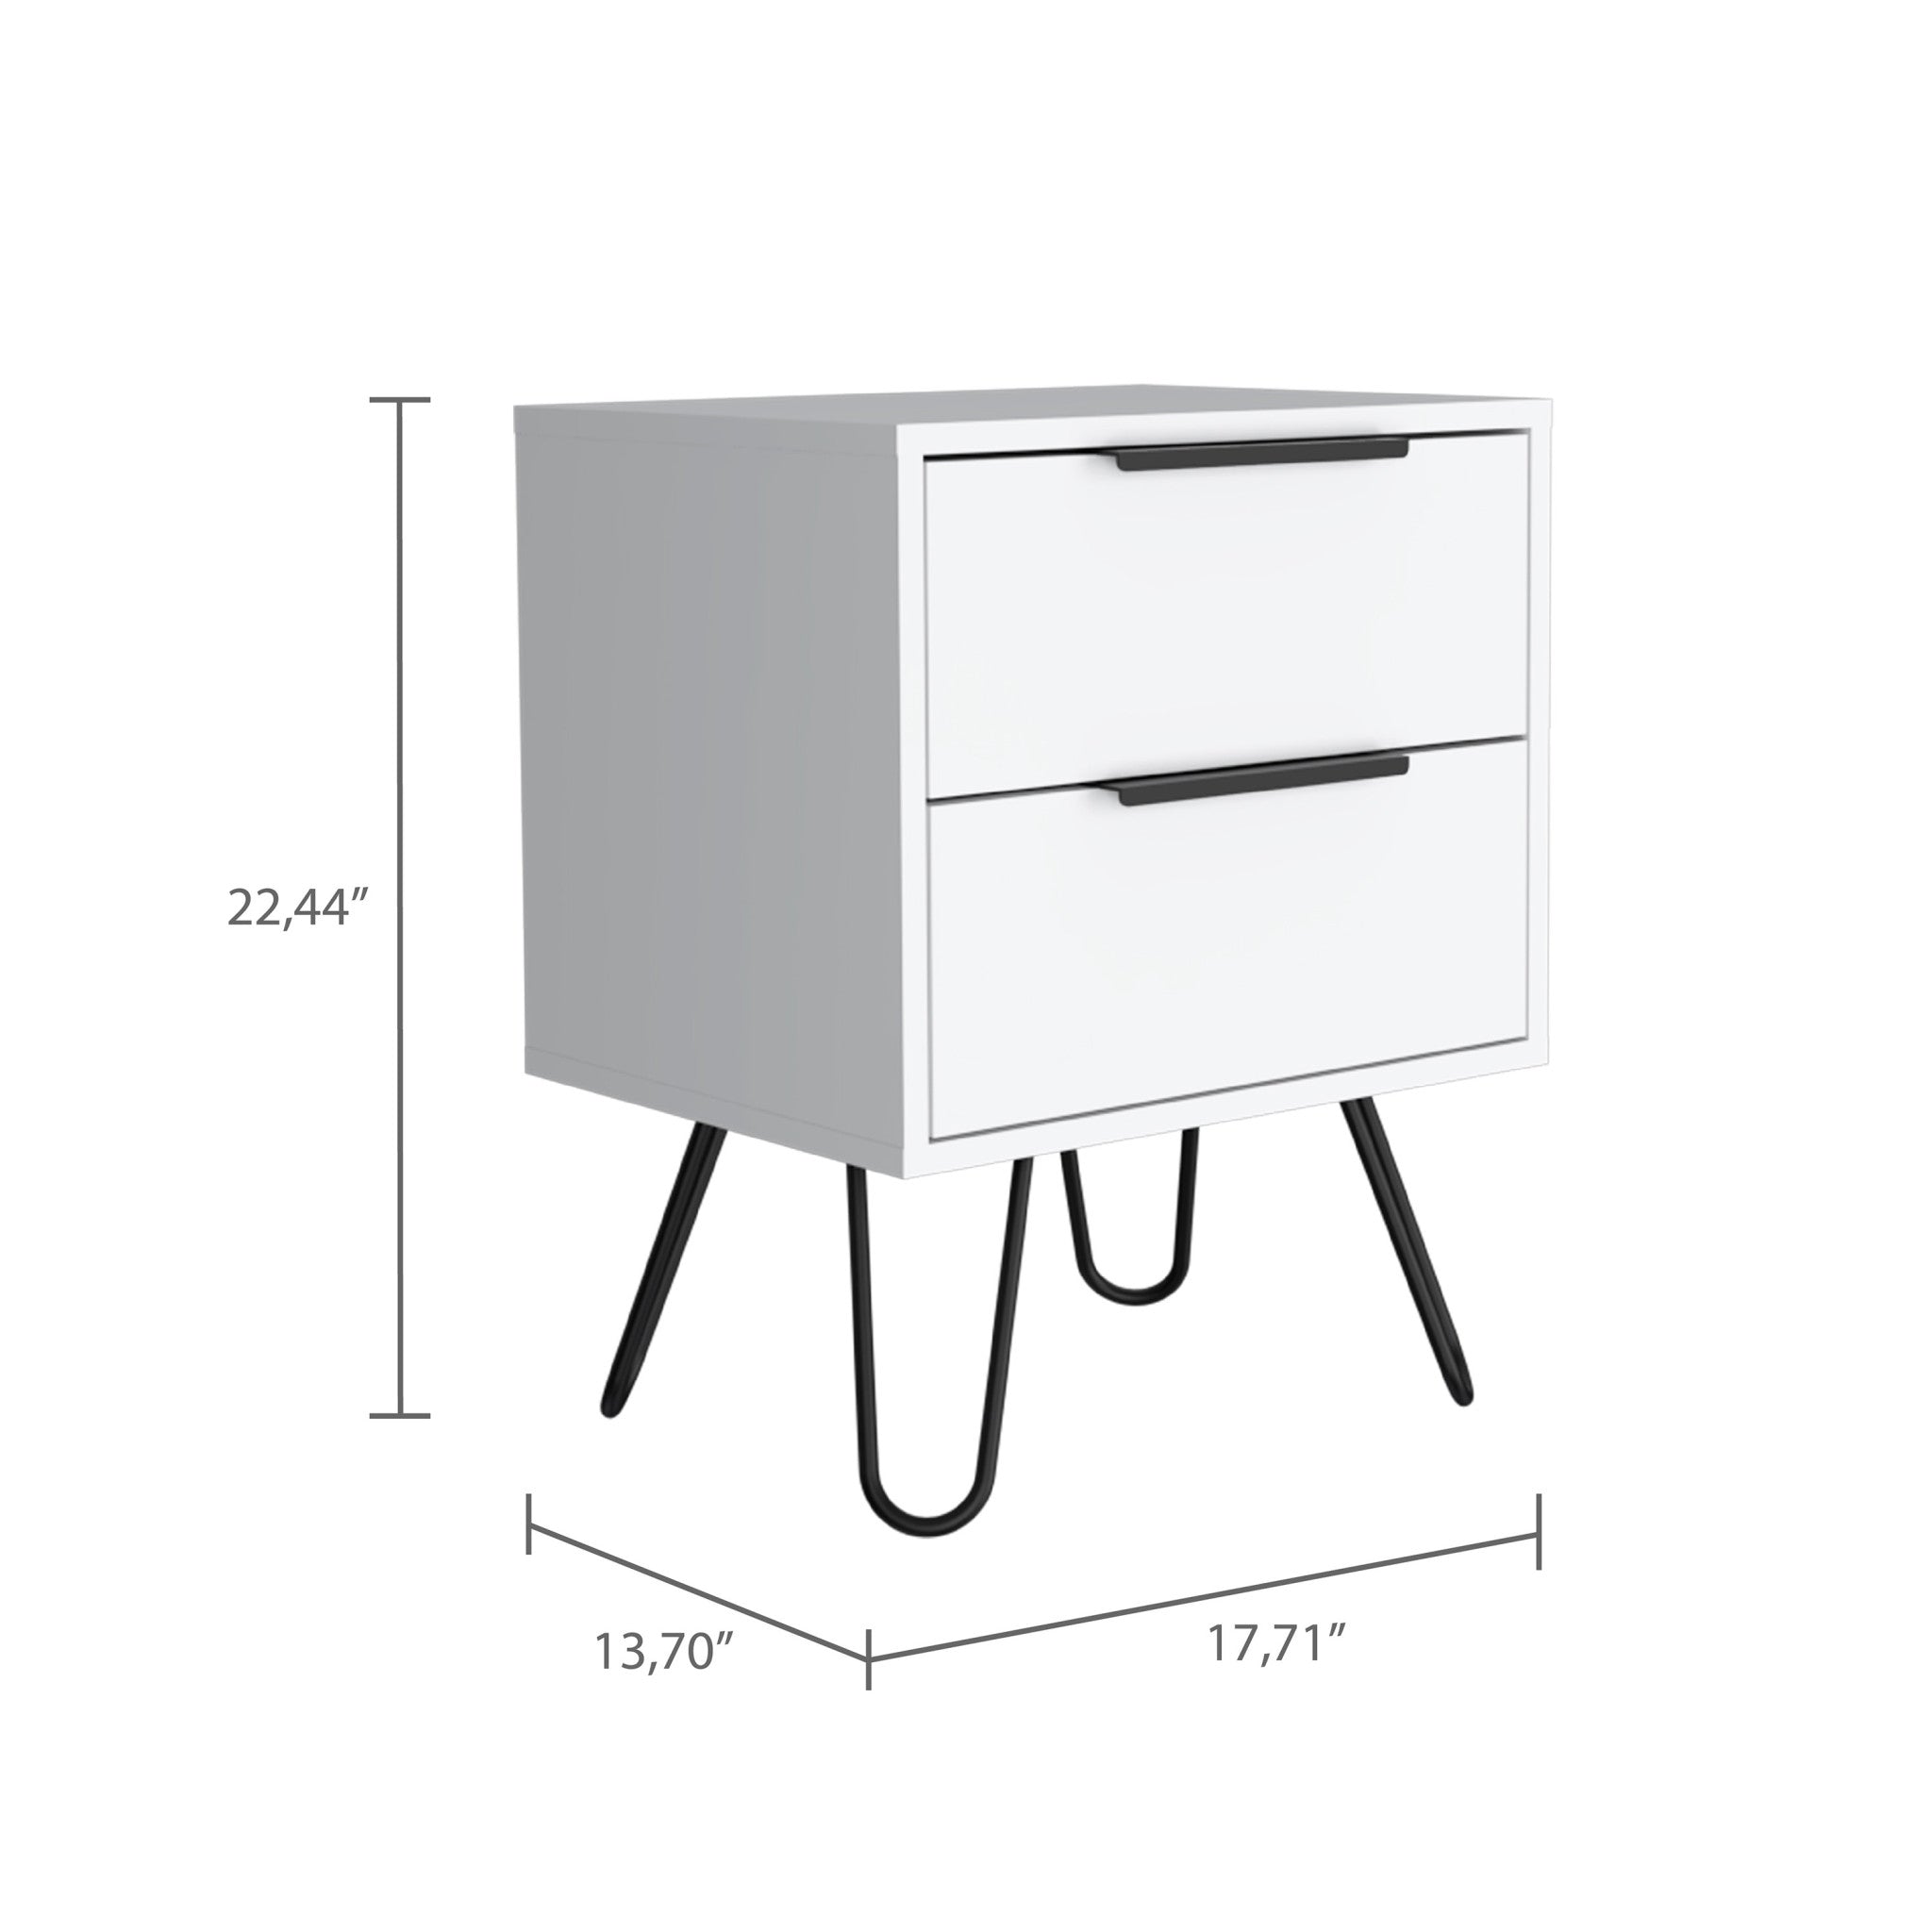 22" White Two Drawer Nightstand